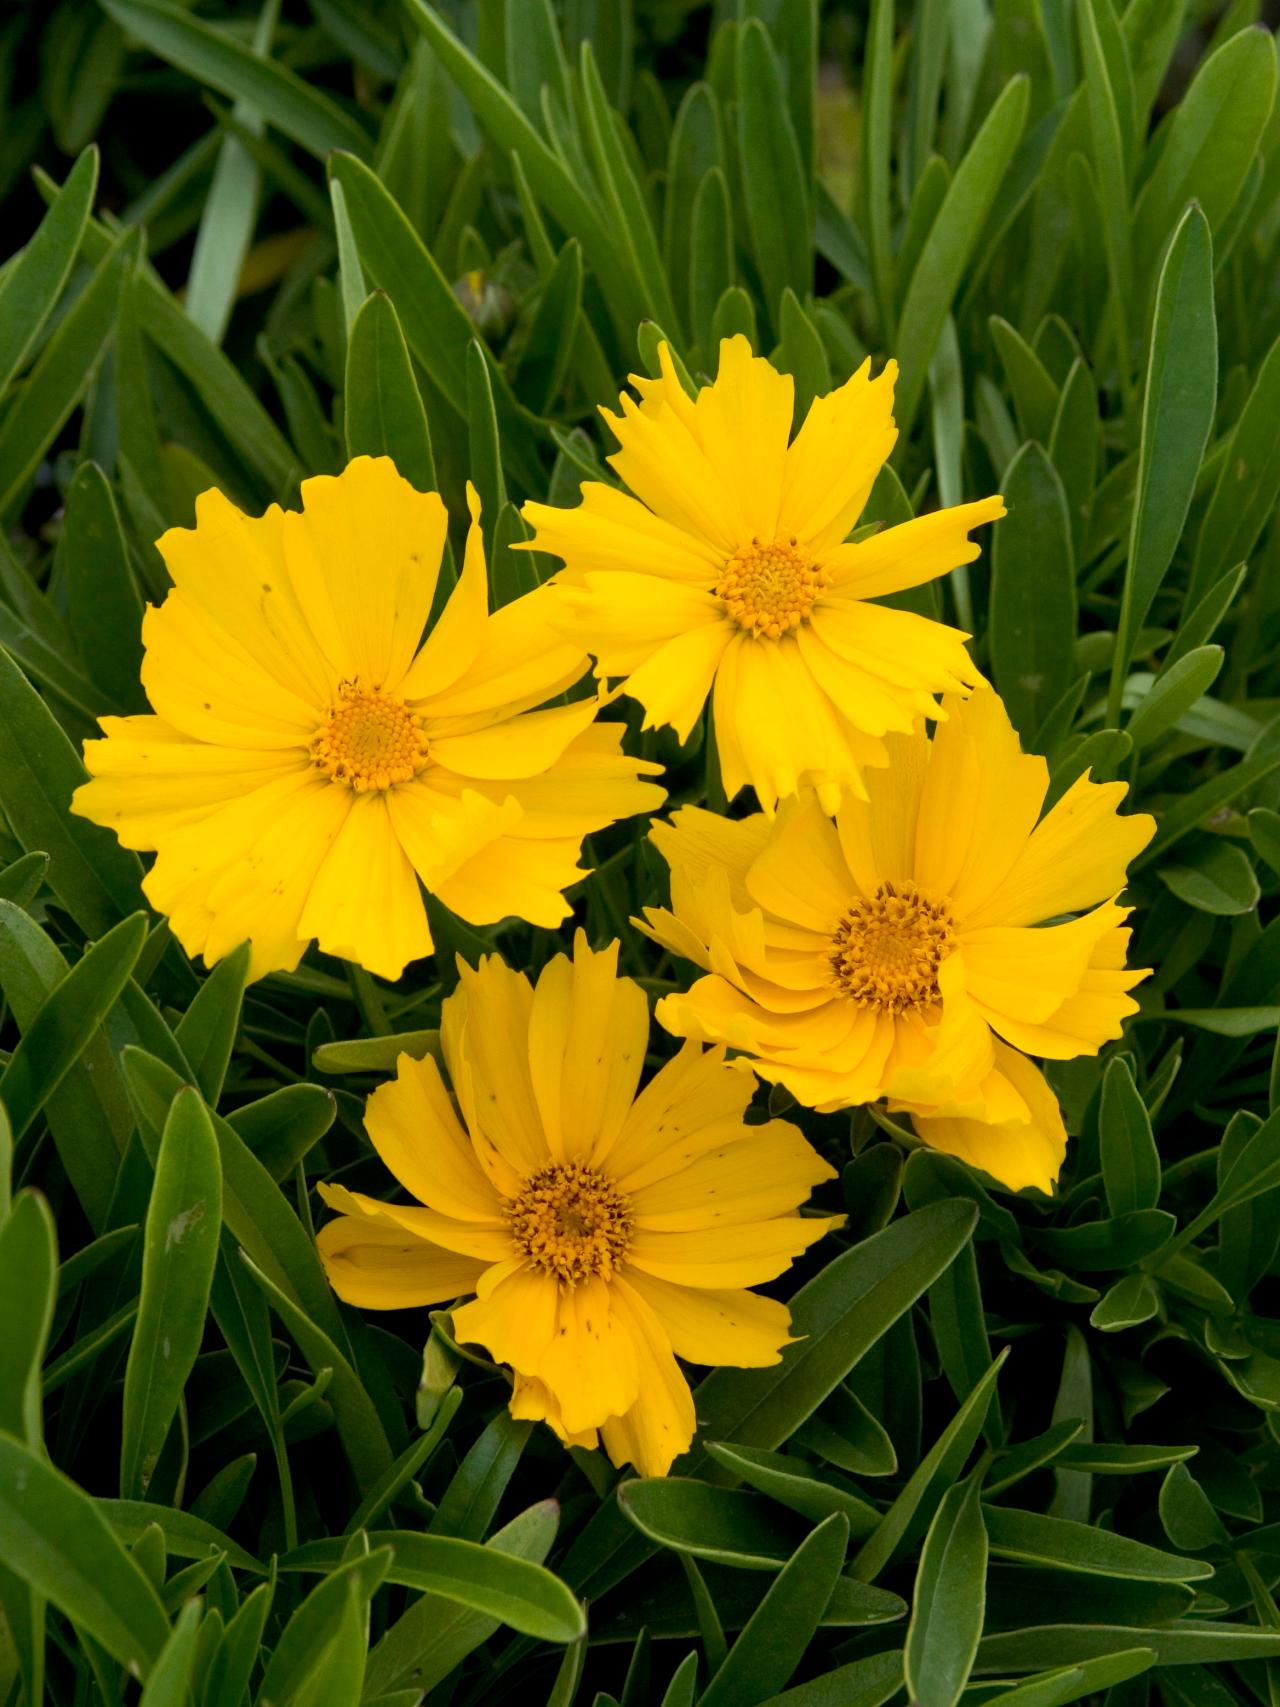 coreopsis flower: how to grow and care for coreopsis | hgtv